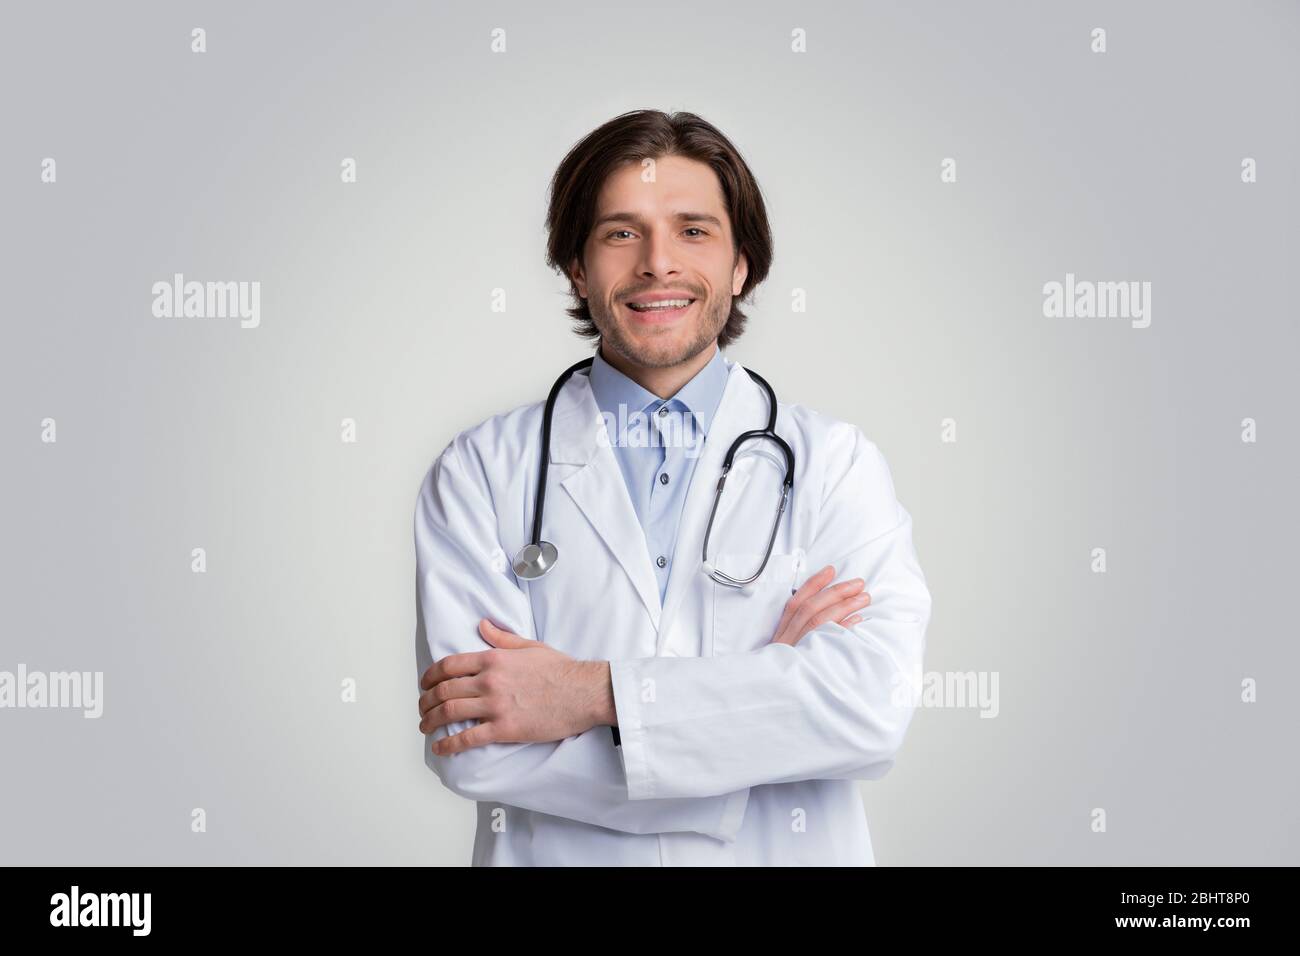 Smiling Medical Specialist Posing With Folded Arms Over White Background Stock Photo